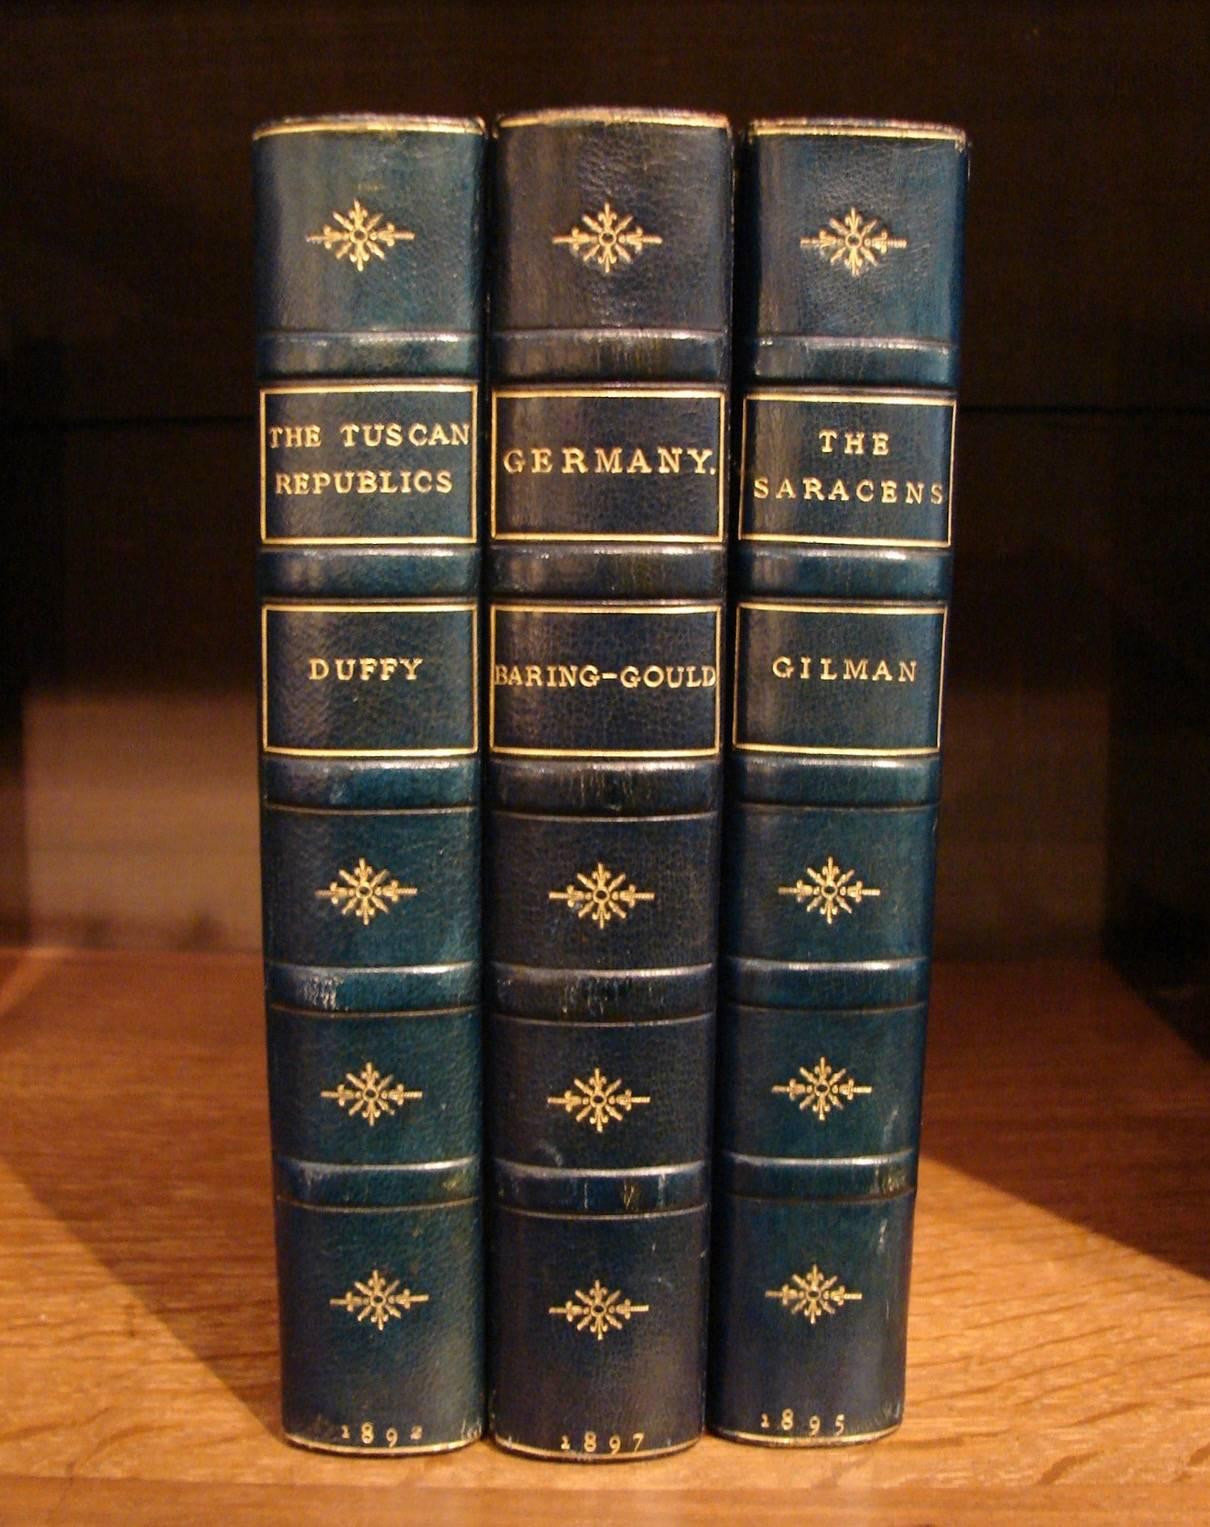 22 volumes World history bound in gilt-tooled blue leather with marbleized endpapers and gilt edges, published London and New York 1898 by T. Fisher Unwin and G.P. Putnams Sons. An interesting country by country history of the world at the dawn of